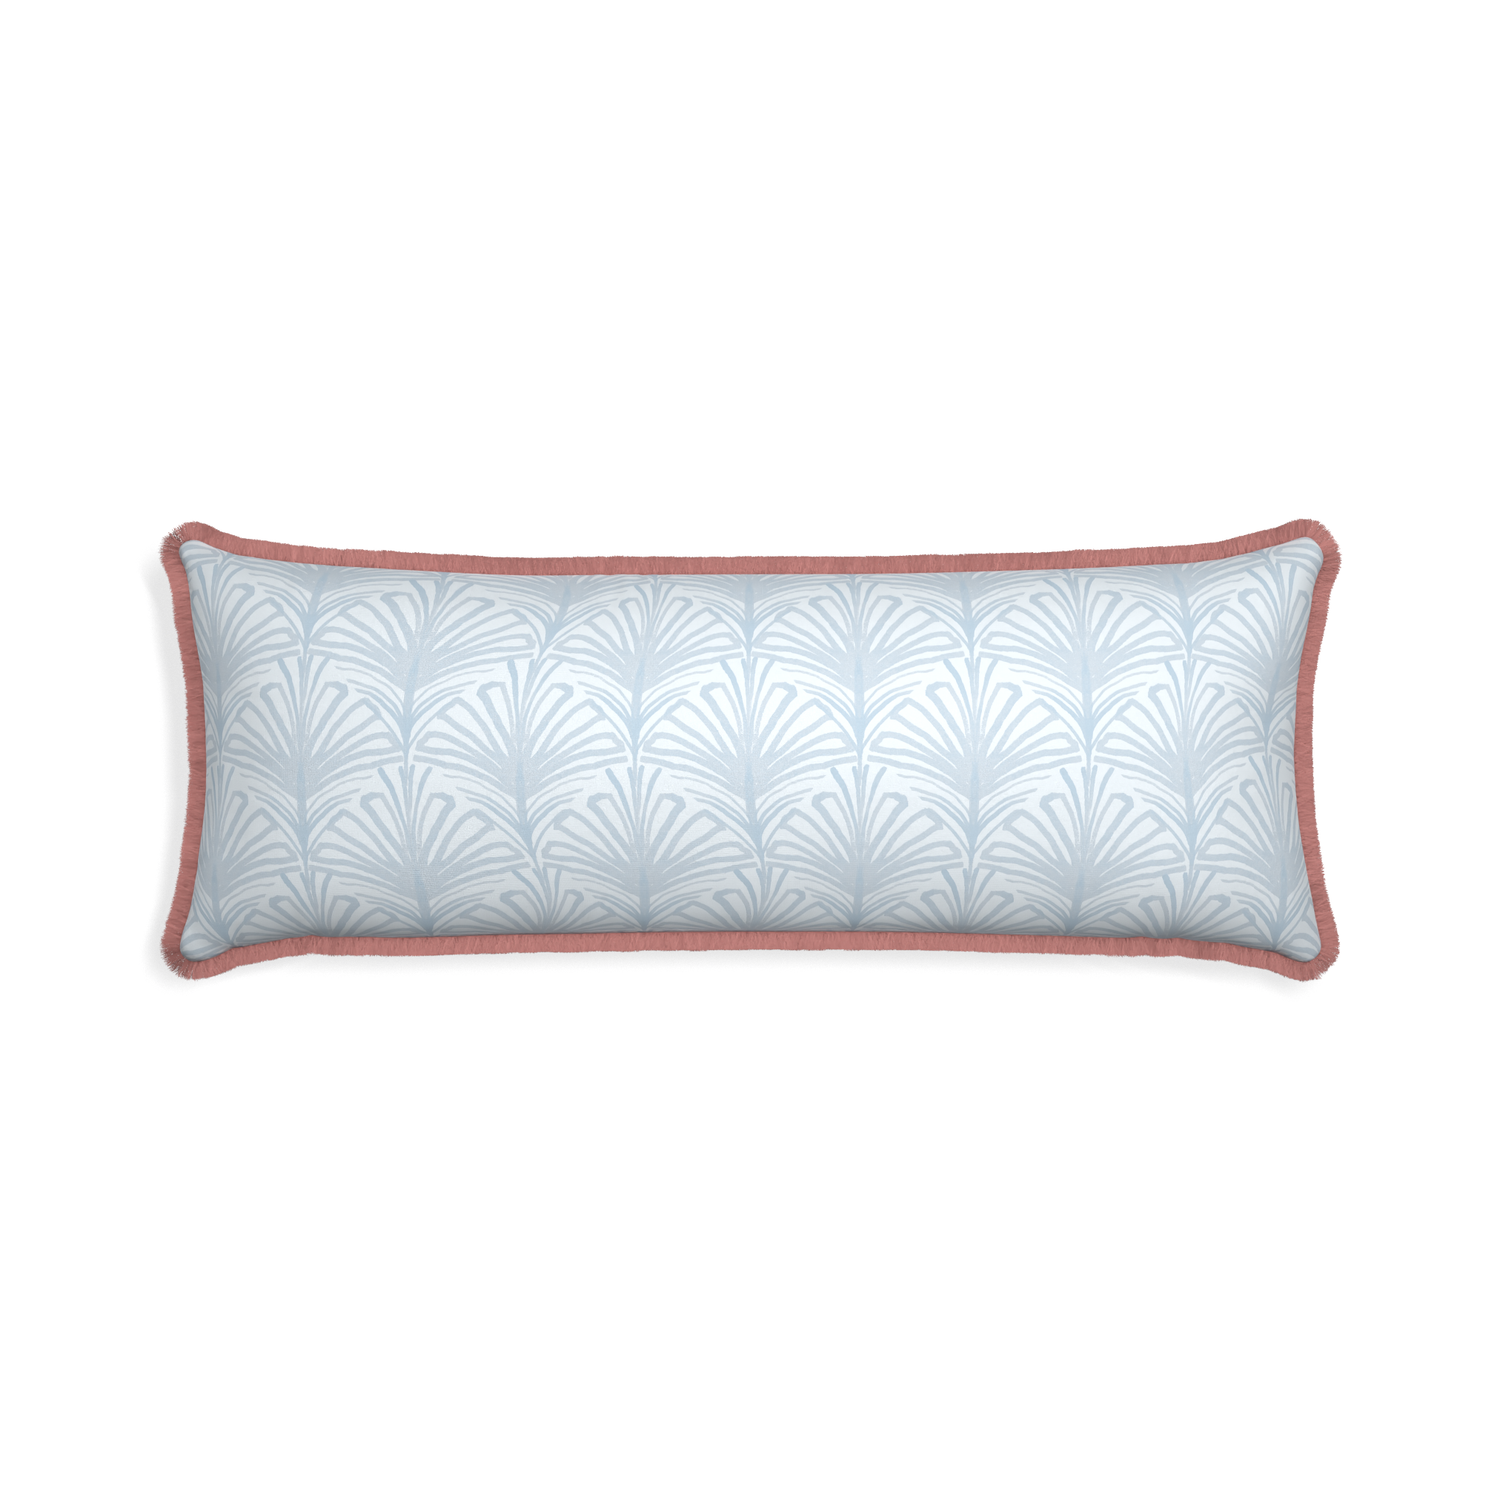 Xl-lumbar suzy sky custom pillow with d fringe on white background